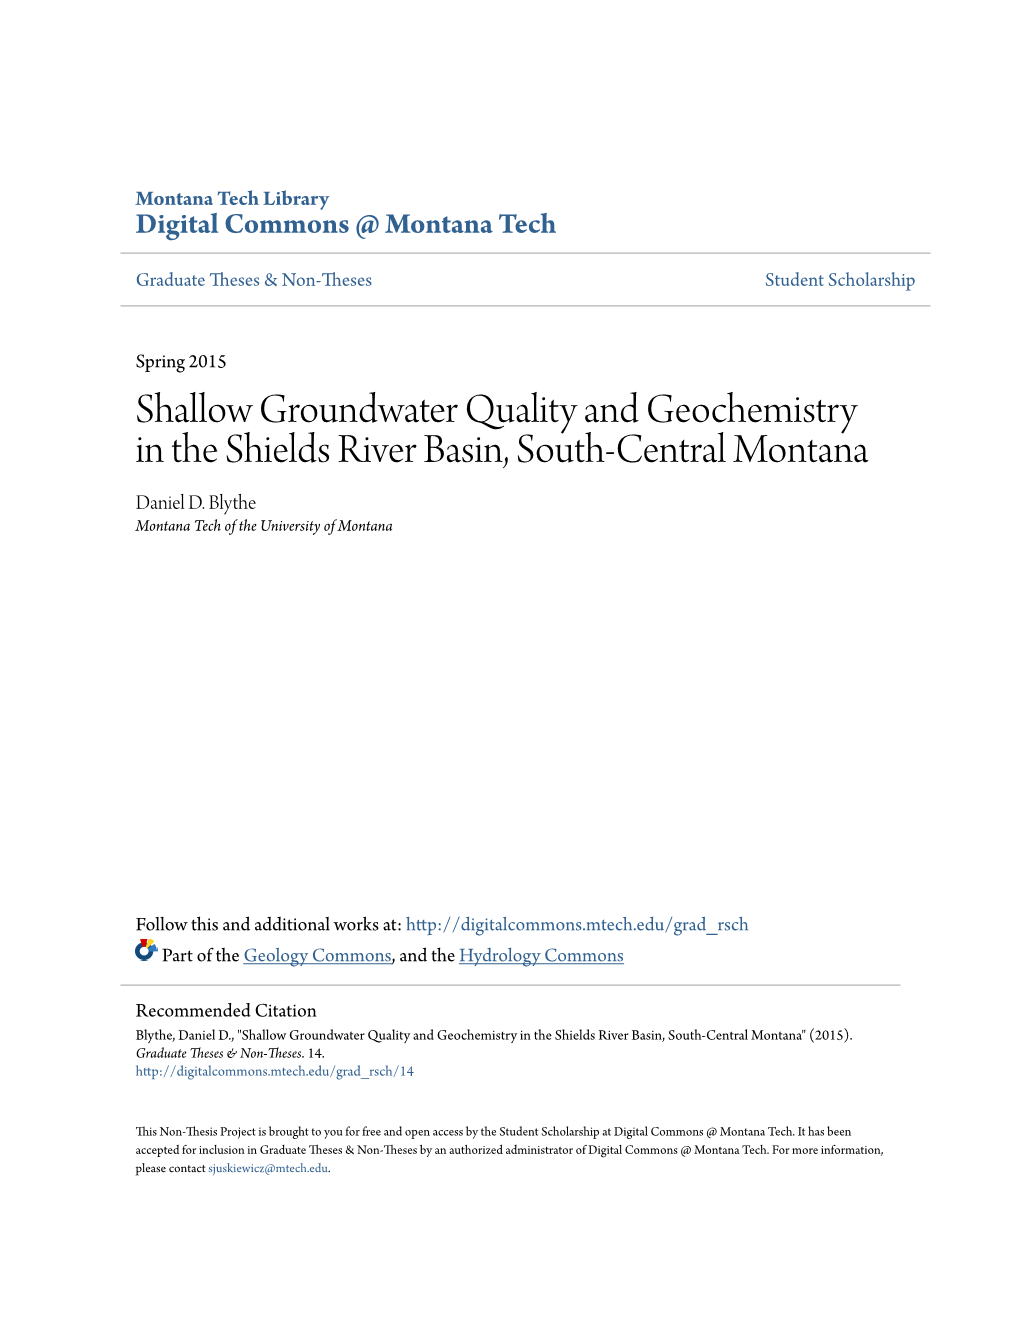 Shallow Groundwater Quality and Geochemistry in the Shields River Basin, South-Central Montana Daniel D